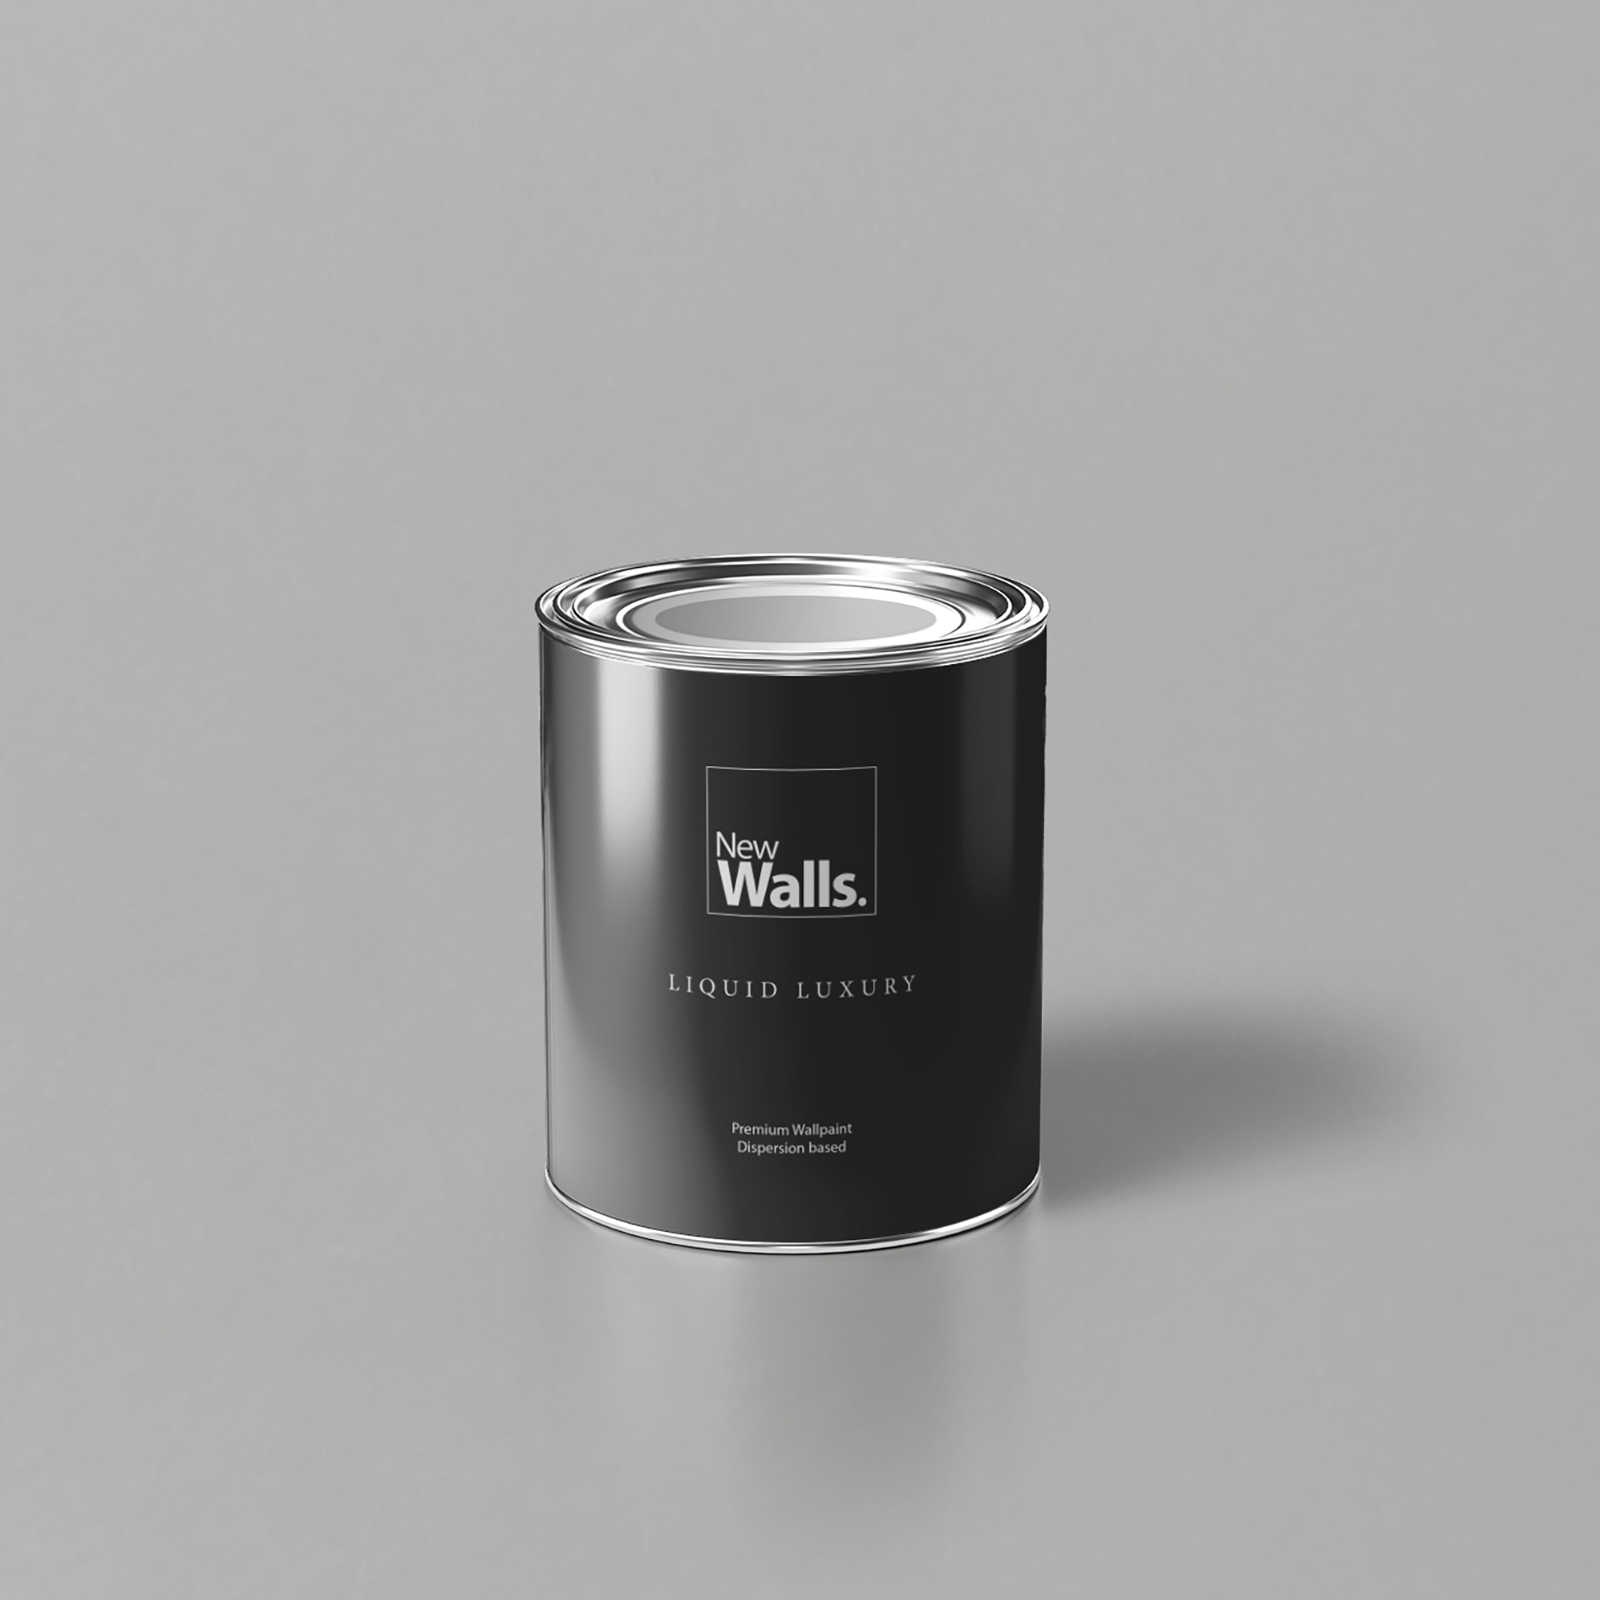         Premium Wall Paint homely silver »Creamy Grey« NW109 – 1 litre
    